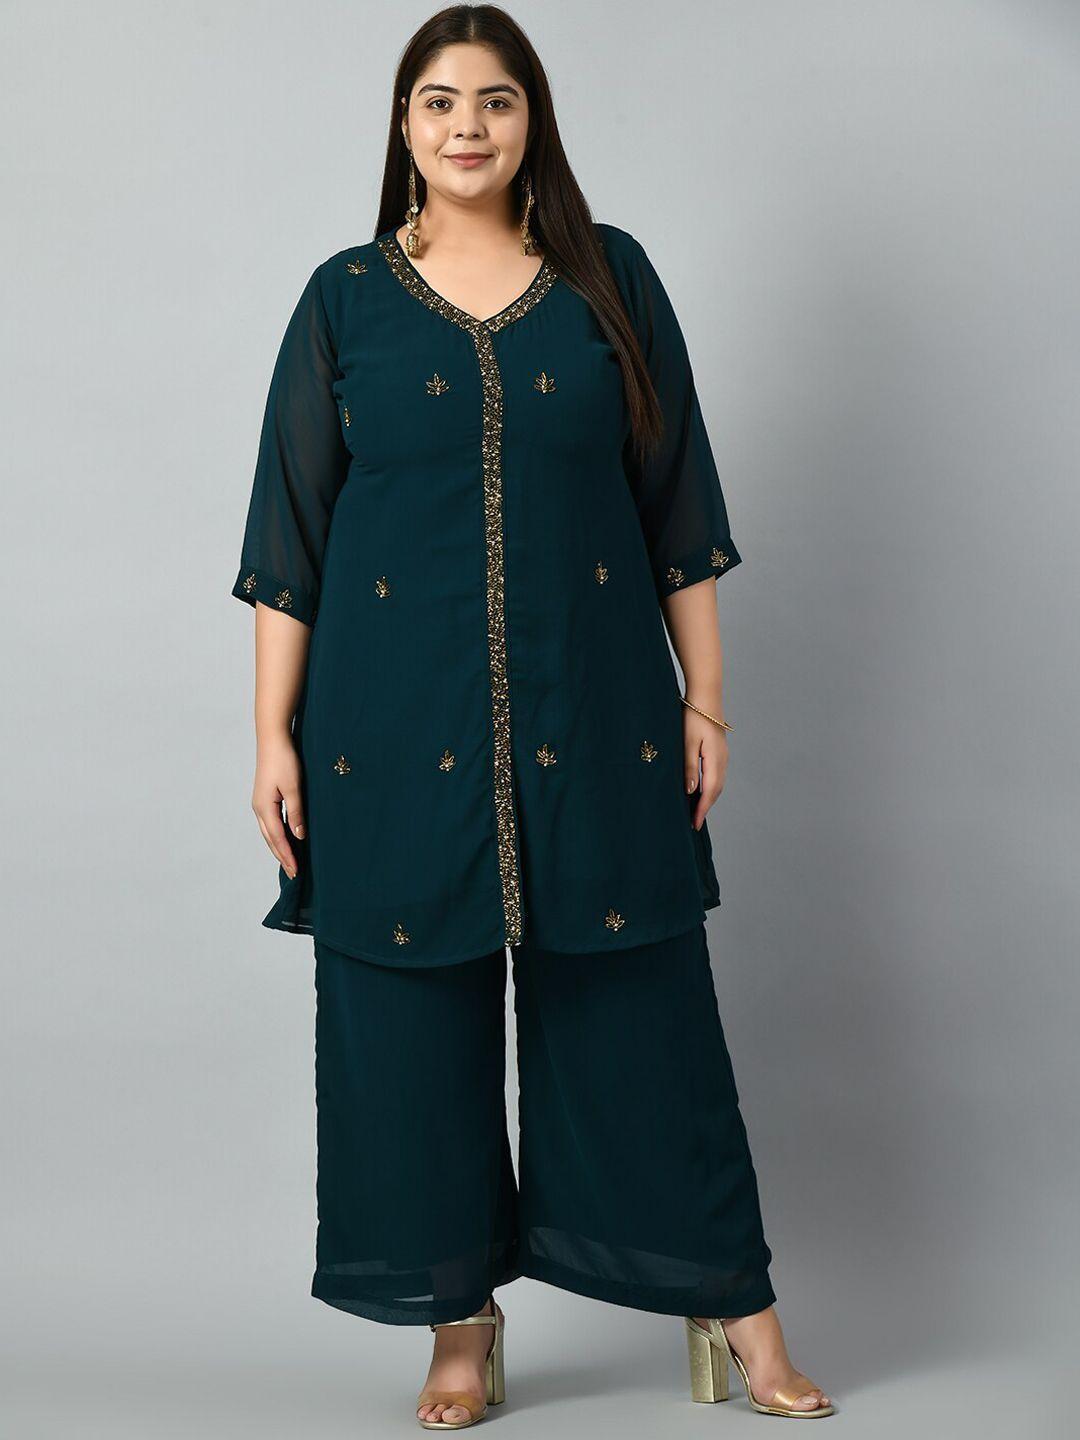 prettyplus by desinoor.com plus size floral embroidered beads & stones kurta with palazzos